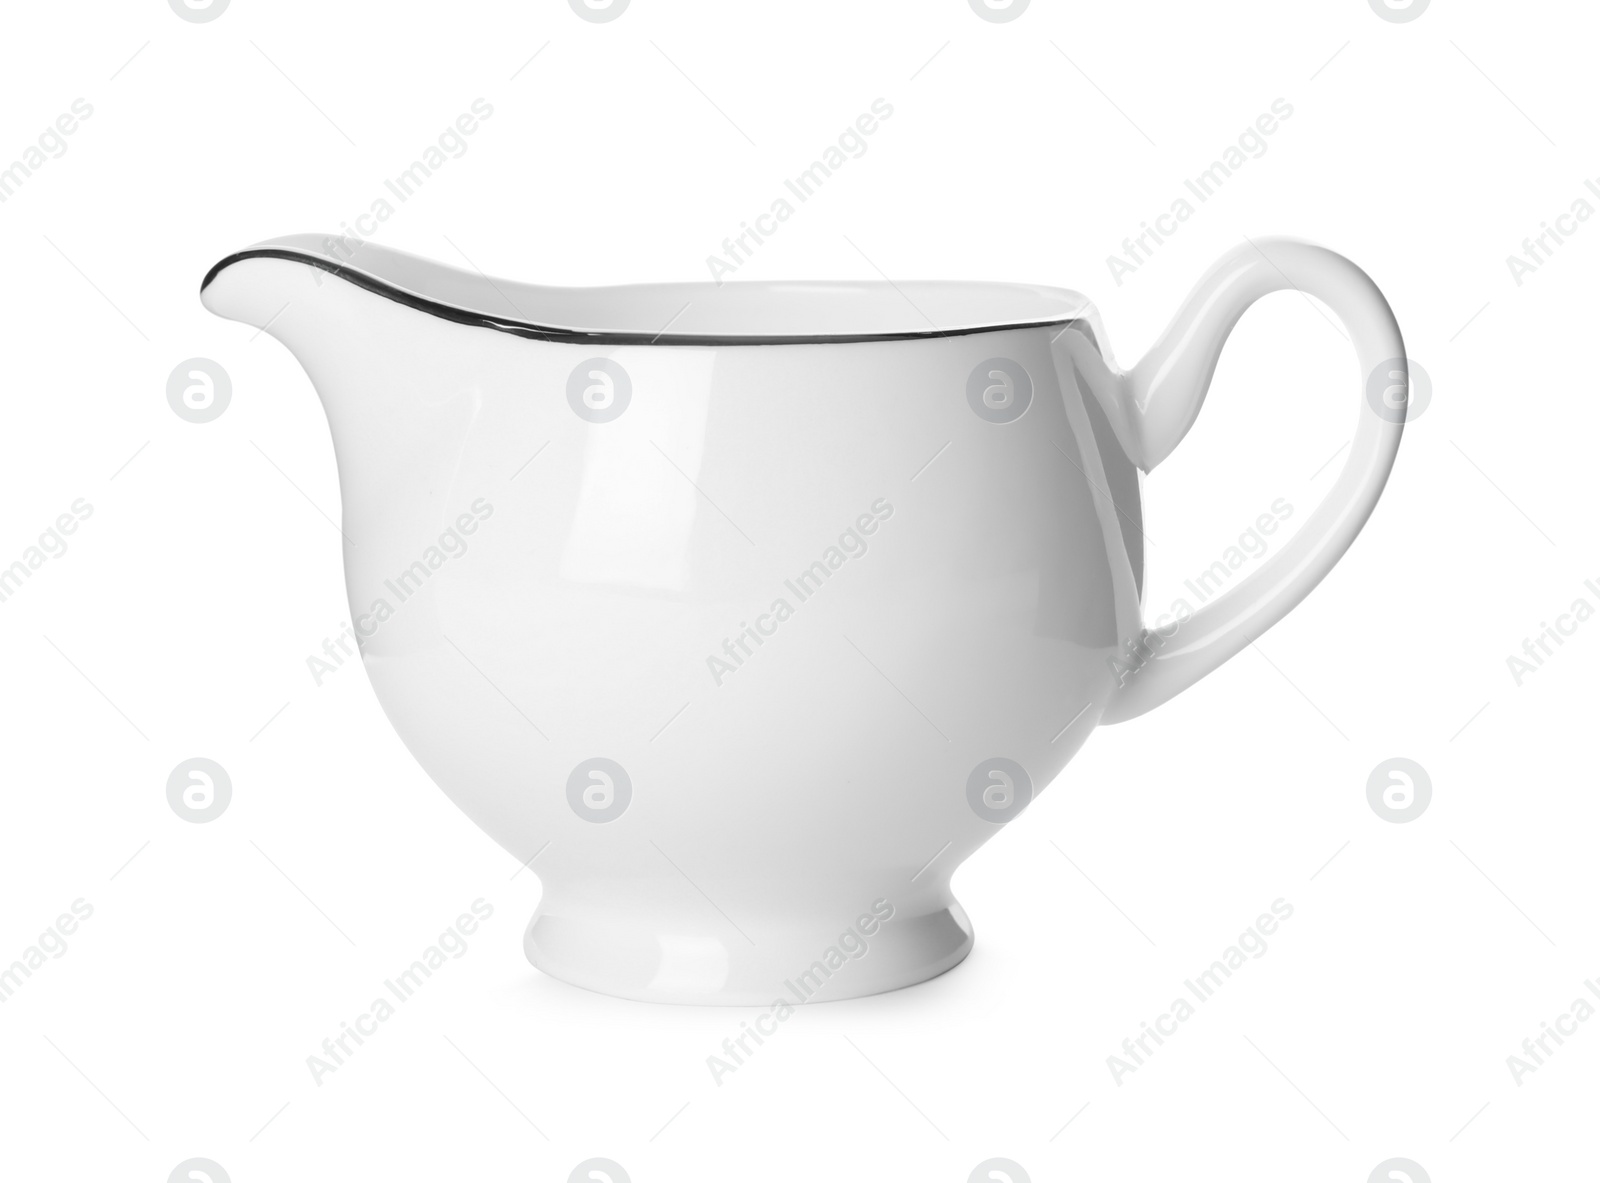 Photo of New ceramic sauce boat isolated on white. Tableware